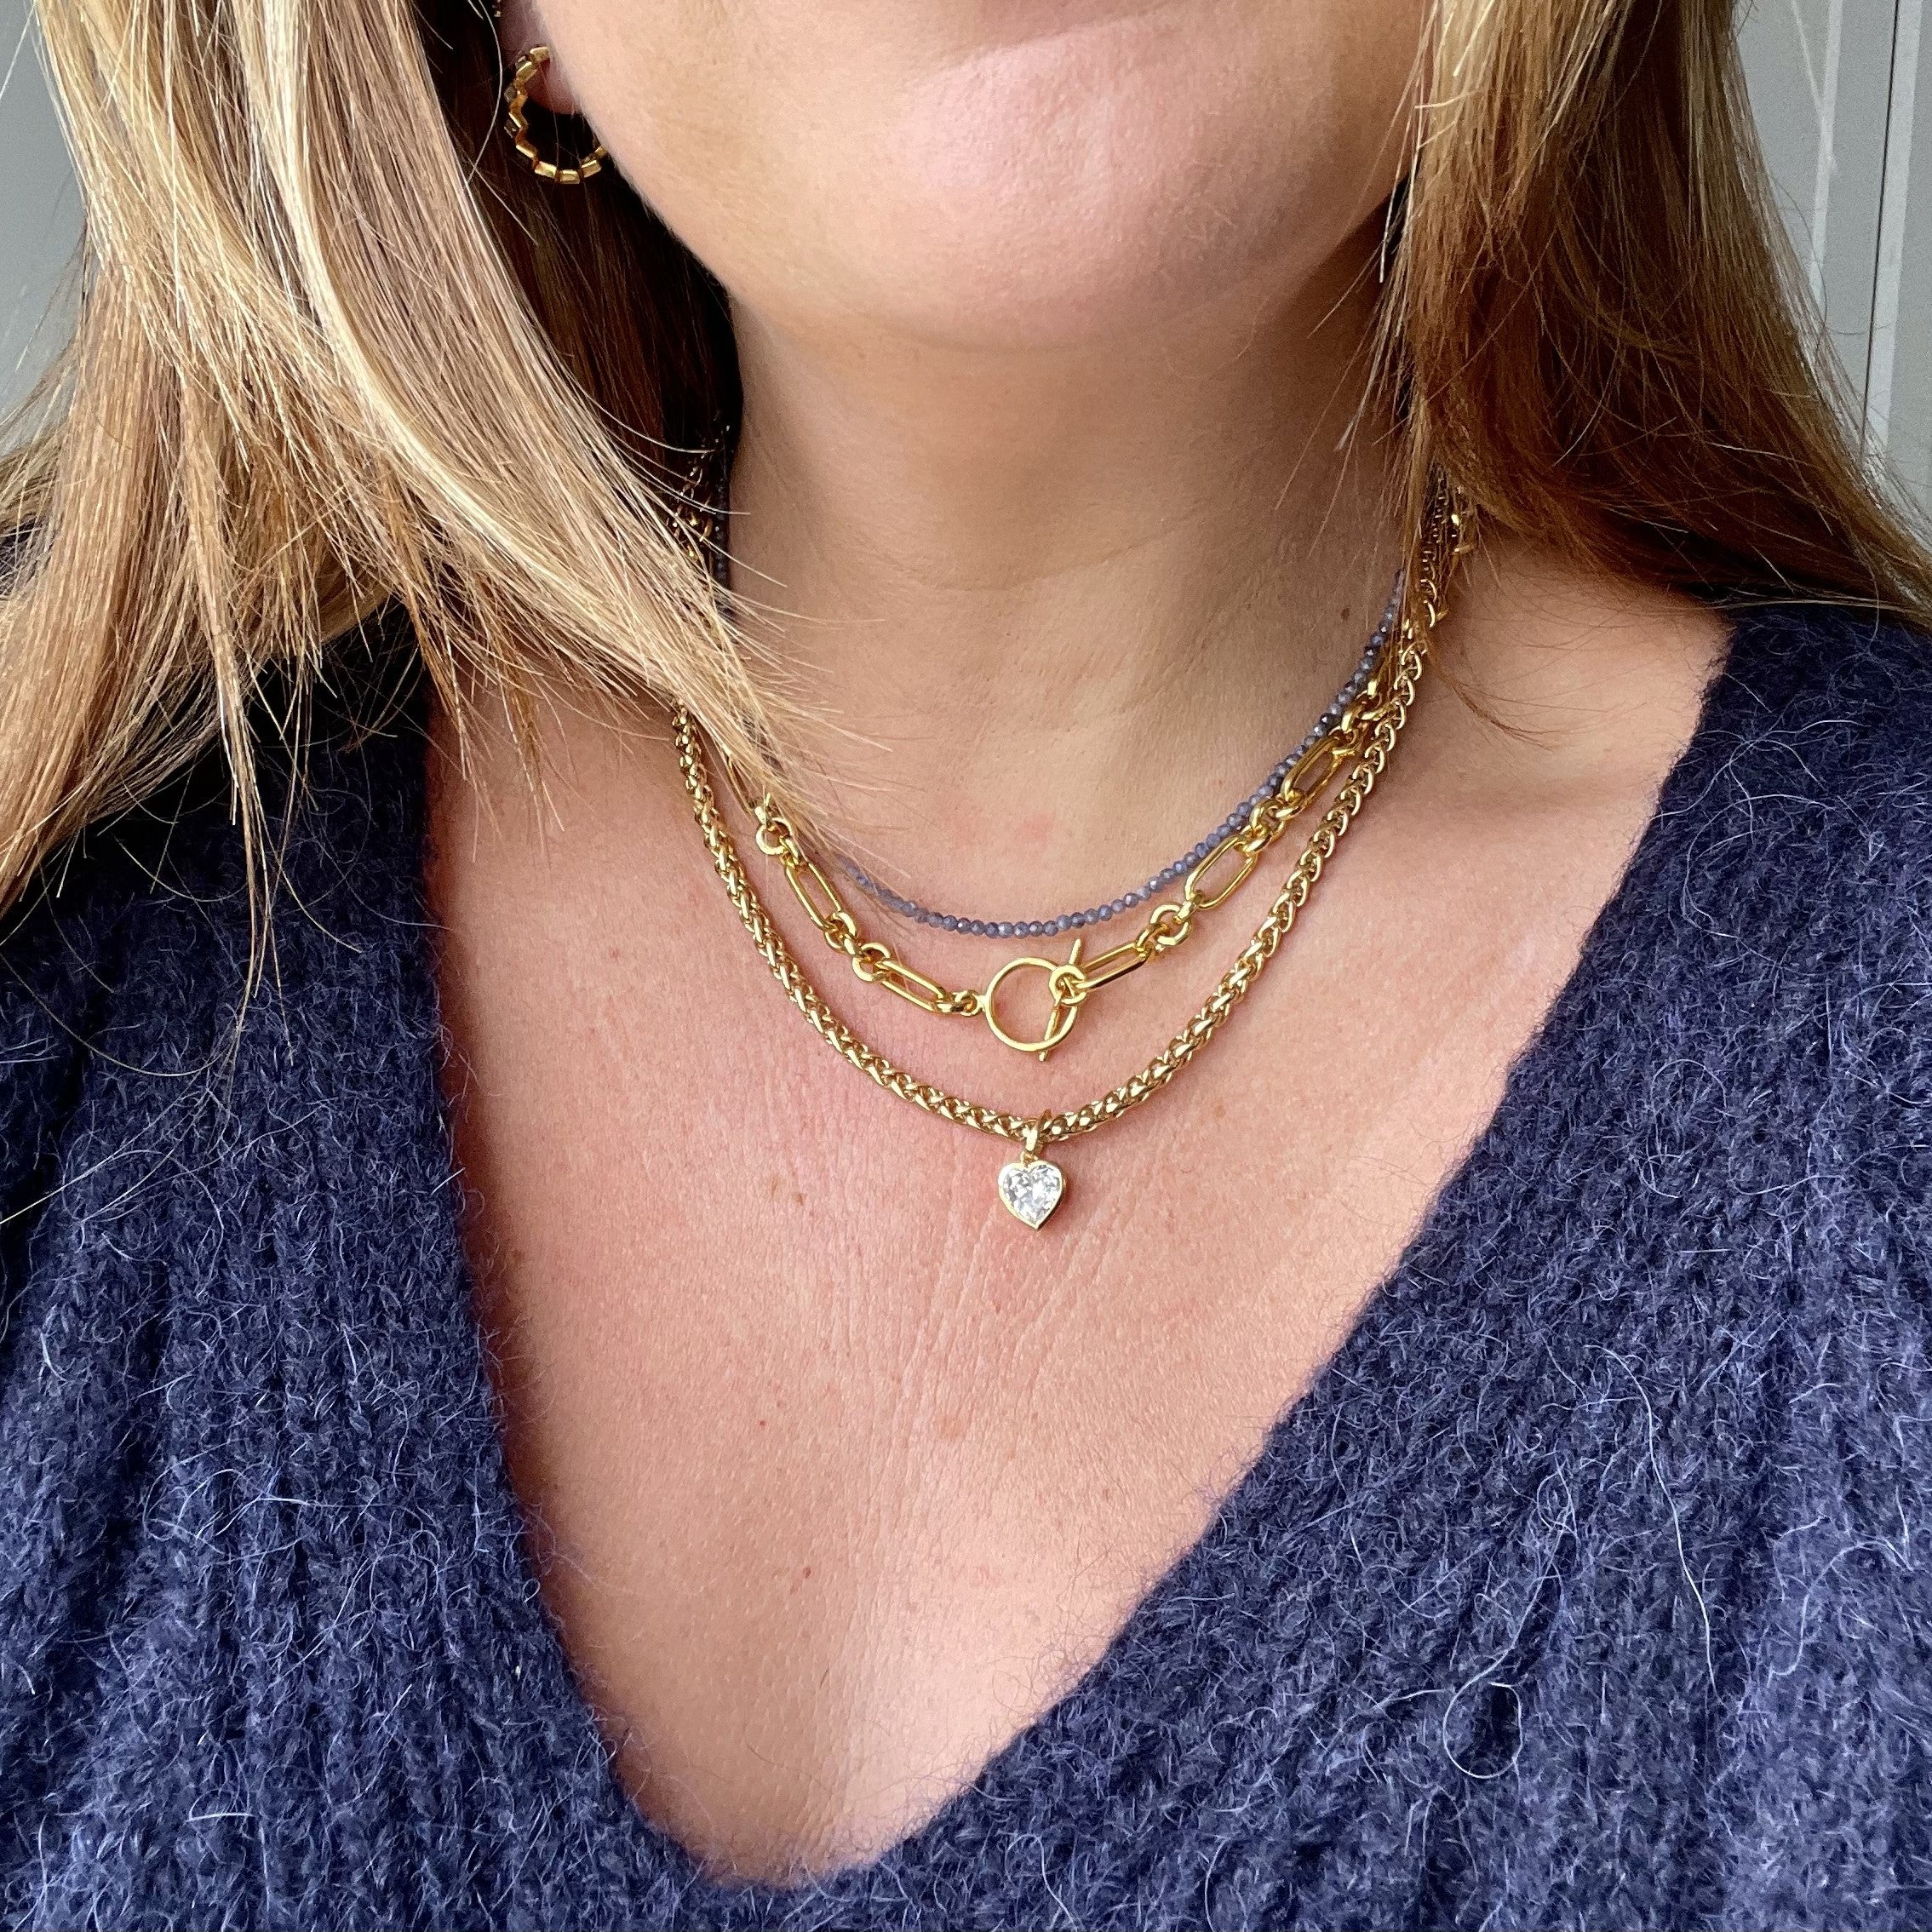 John Ross Jewellers - This 9ct gold lariat style t-bar necklace is  stunning! 😍 The perfect necklace to go over any chunky knit these colder  days or dressed up for a Christmas